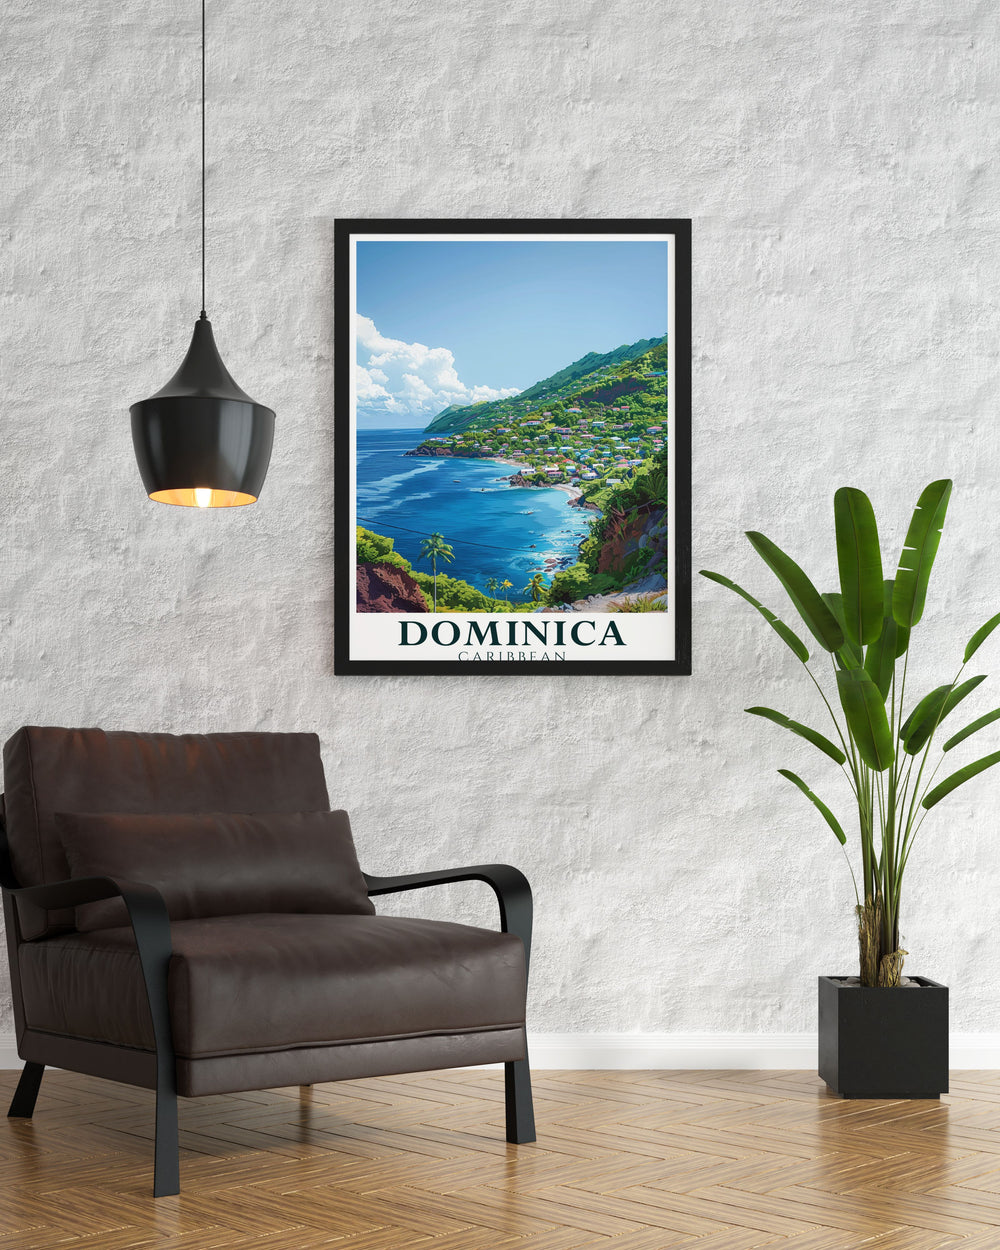 Scotts Head Travel Print capturing the breathtaking scenery of Dominicas Scotts Head with its vibrant coastline and tranquil environment a captivating addition to any living space ideal as a travel gift or unique wall art for Caribbean enthusiasts